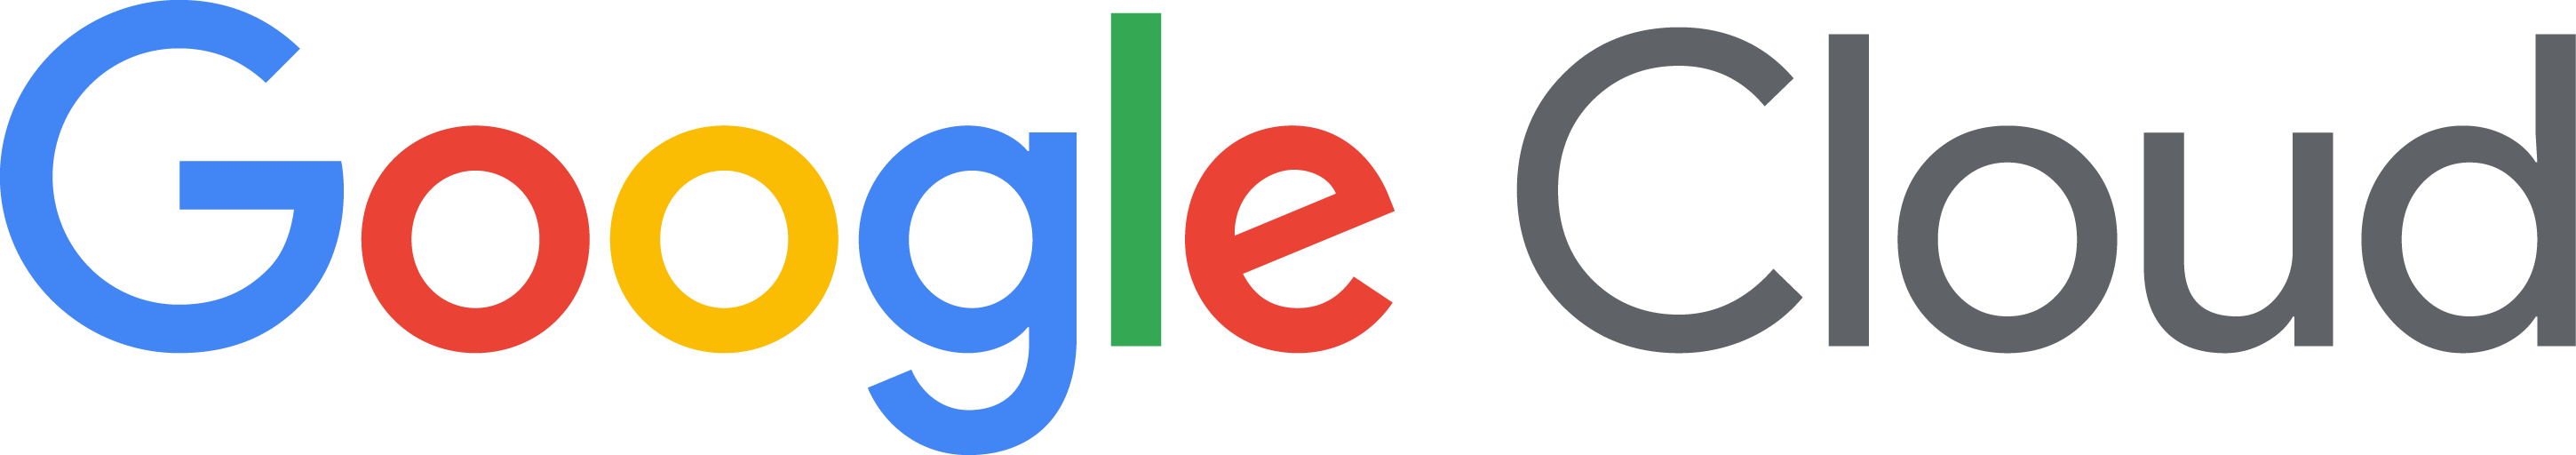 Google Cloud logo, with Google in Google colours